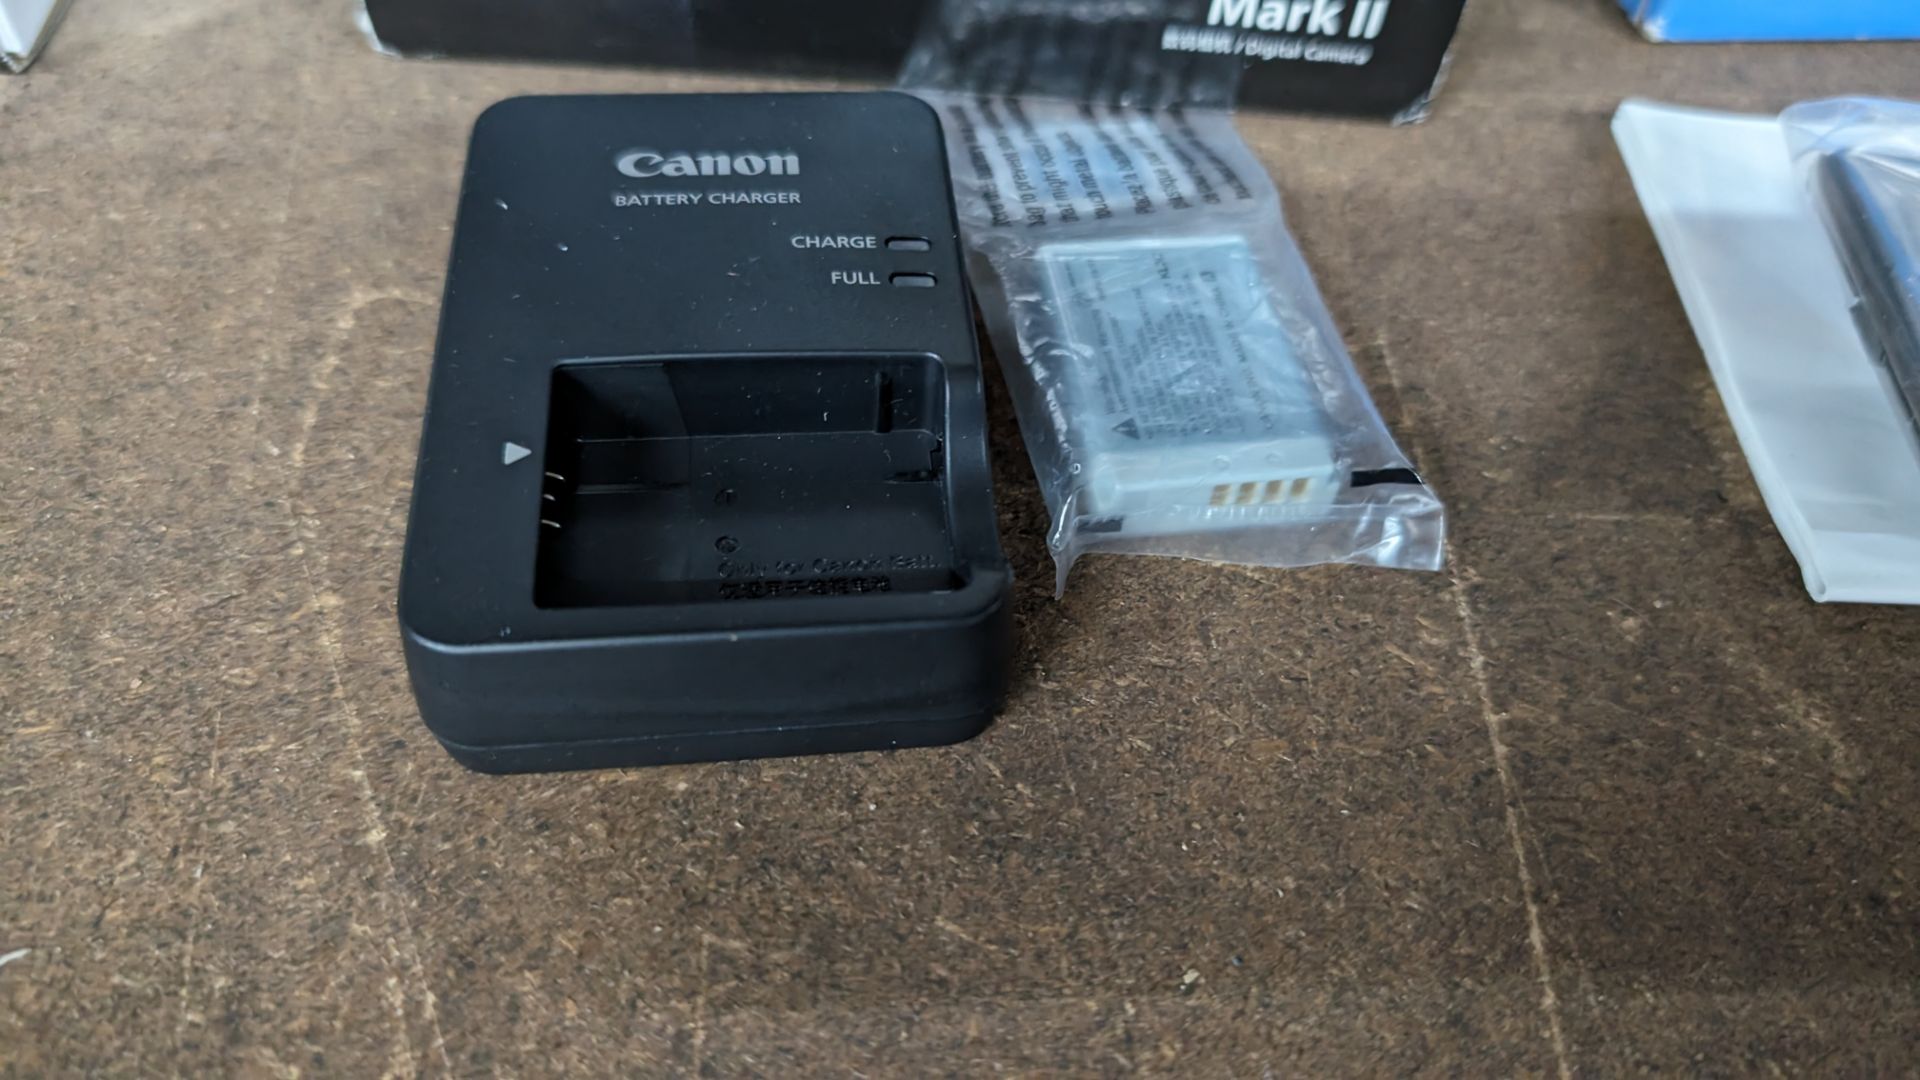 Canon PowerShot G7X Mark II camera, including battery and charger - Image 6 of 12